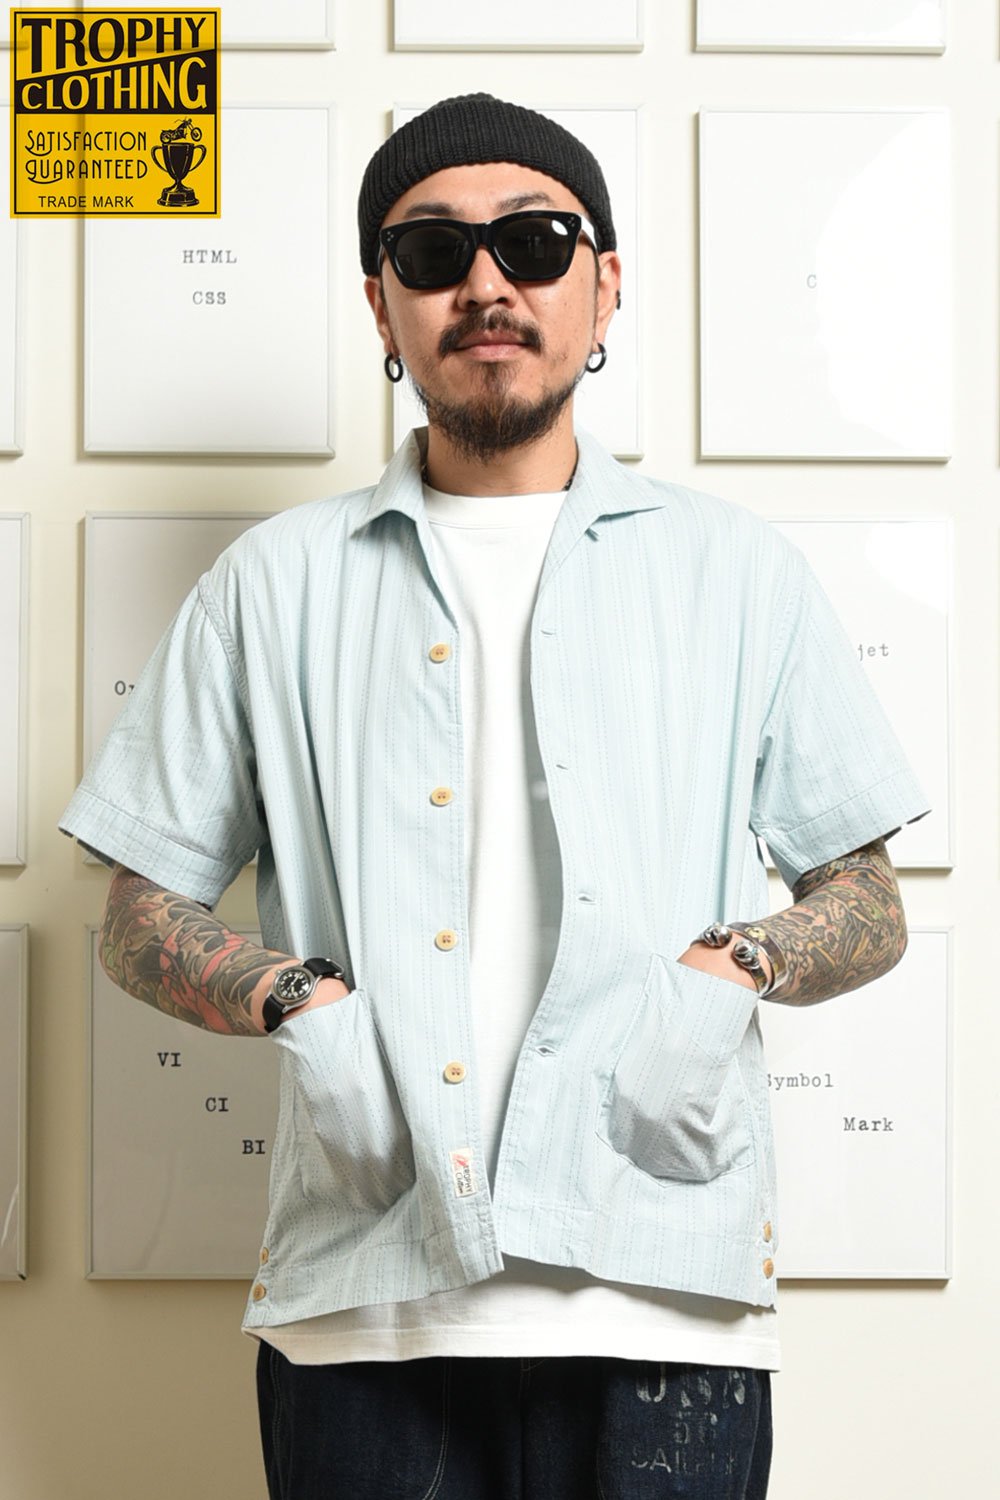 TROPHY CLOTHING(トロフィークロージング) ハバナシャツ HAVANA S/S SHIRT TR20SS-405 通販正規取扱 |  ハーレムストア公式通販サイト